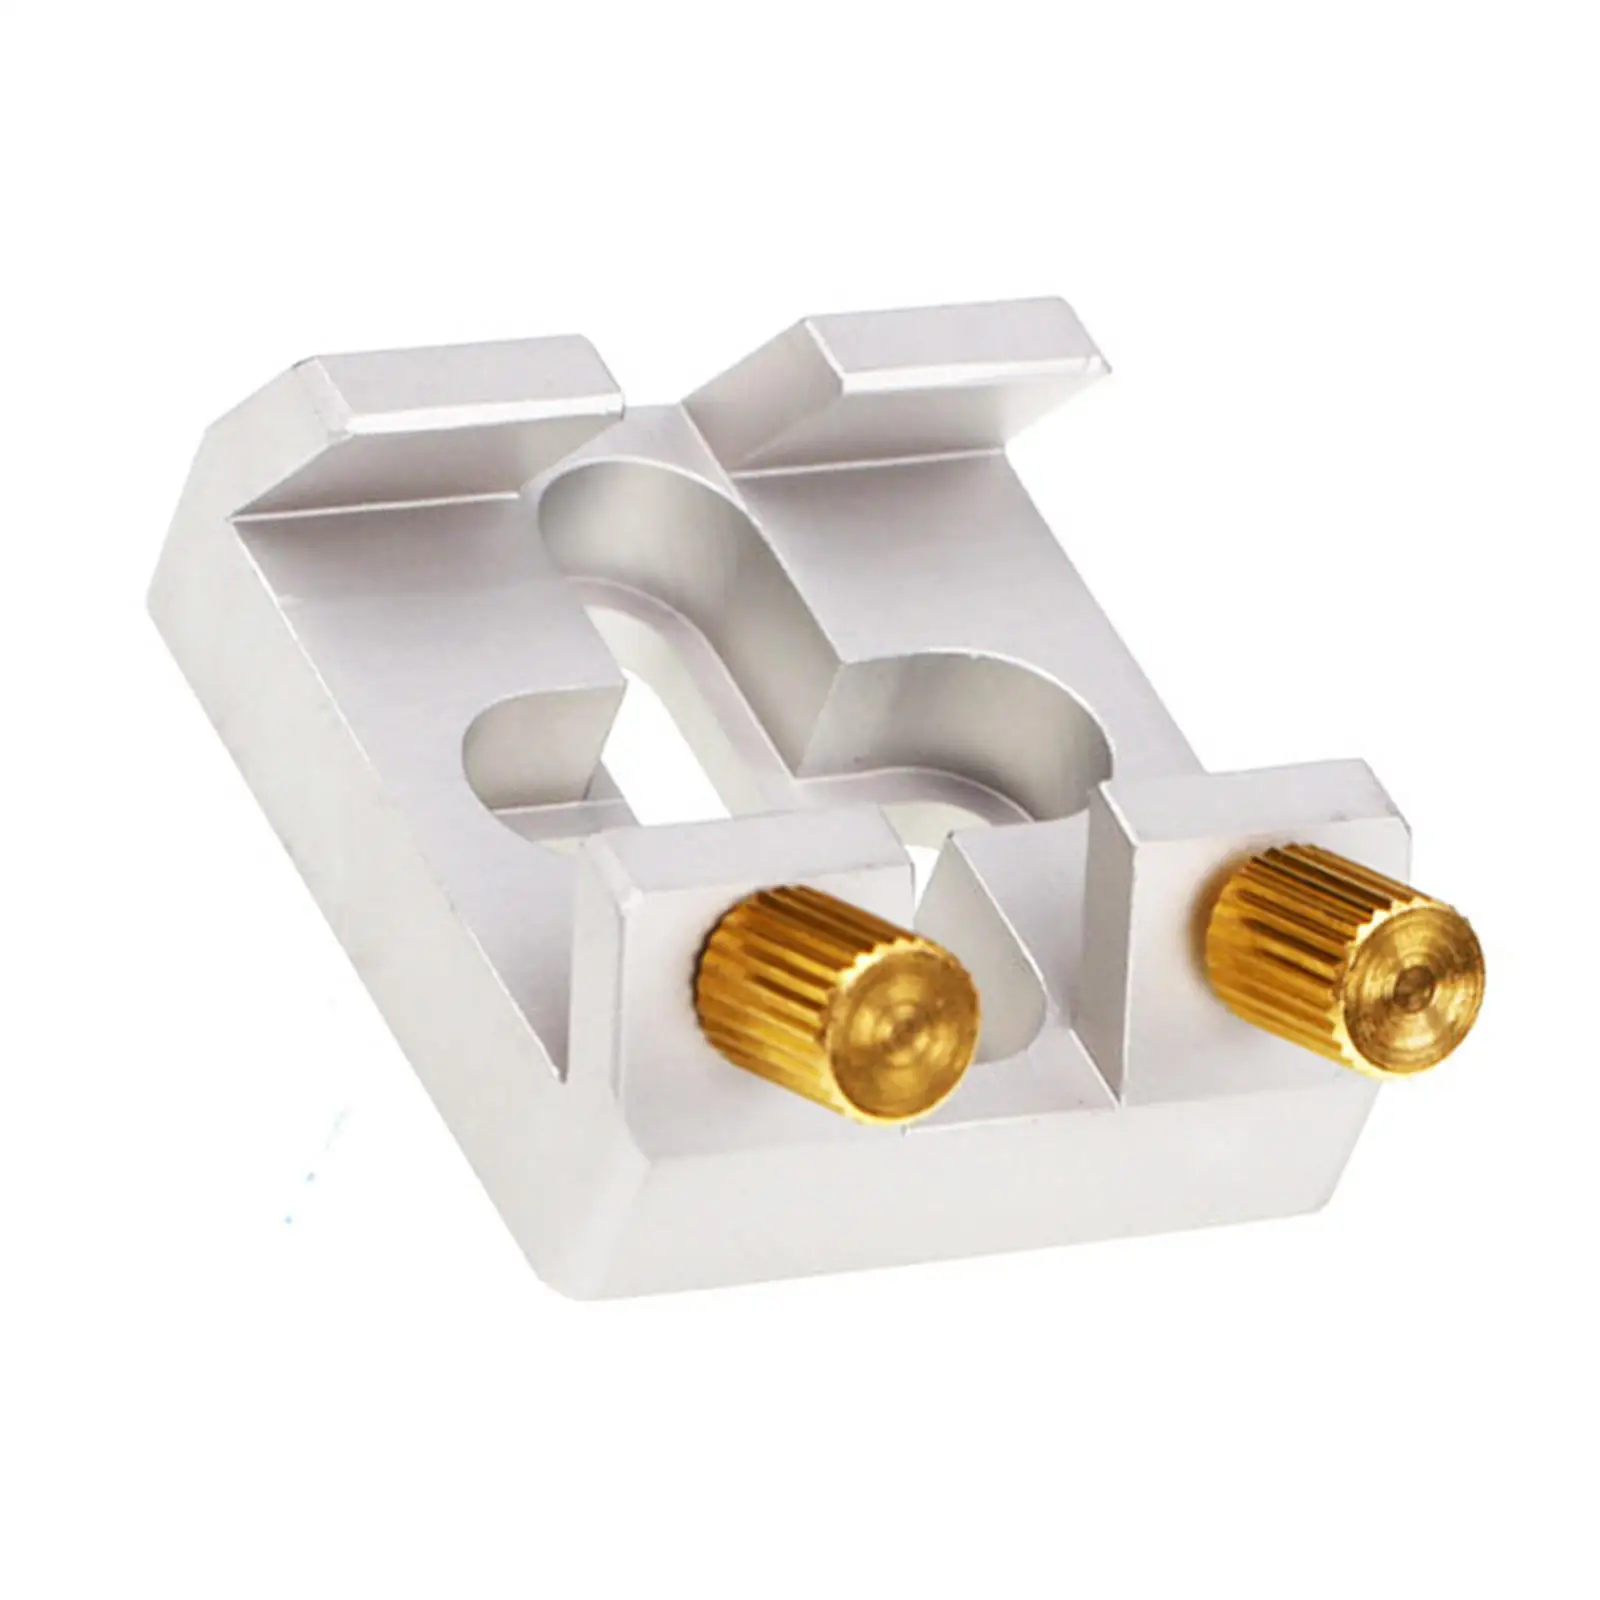 Universal Dovetail Base for Finder Scope Installation of Finder Scope with Screw Telescope Dovetail Slot Plate Accessories Parts